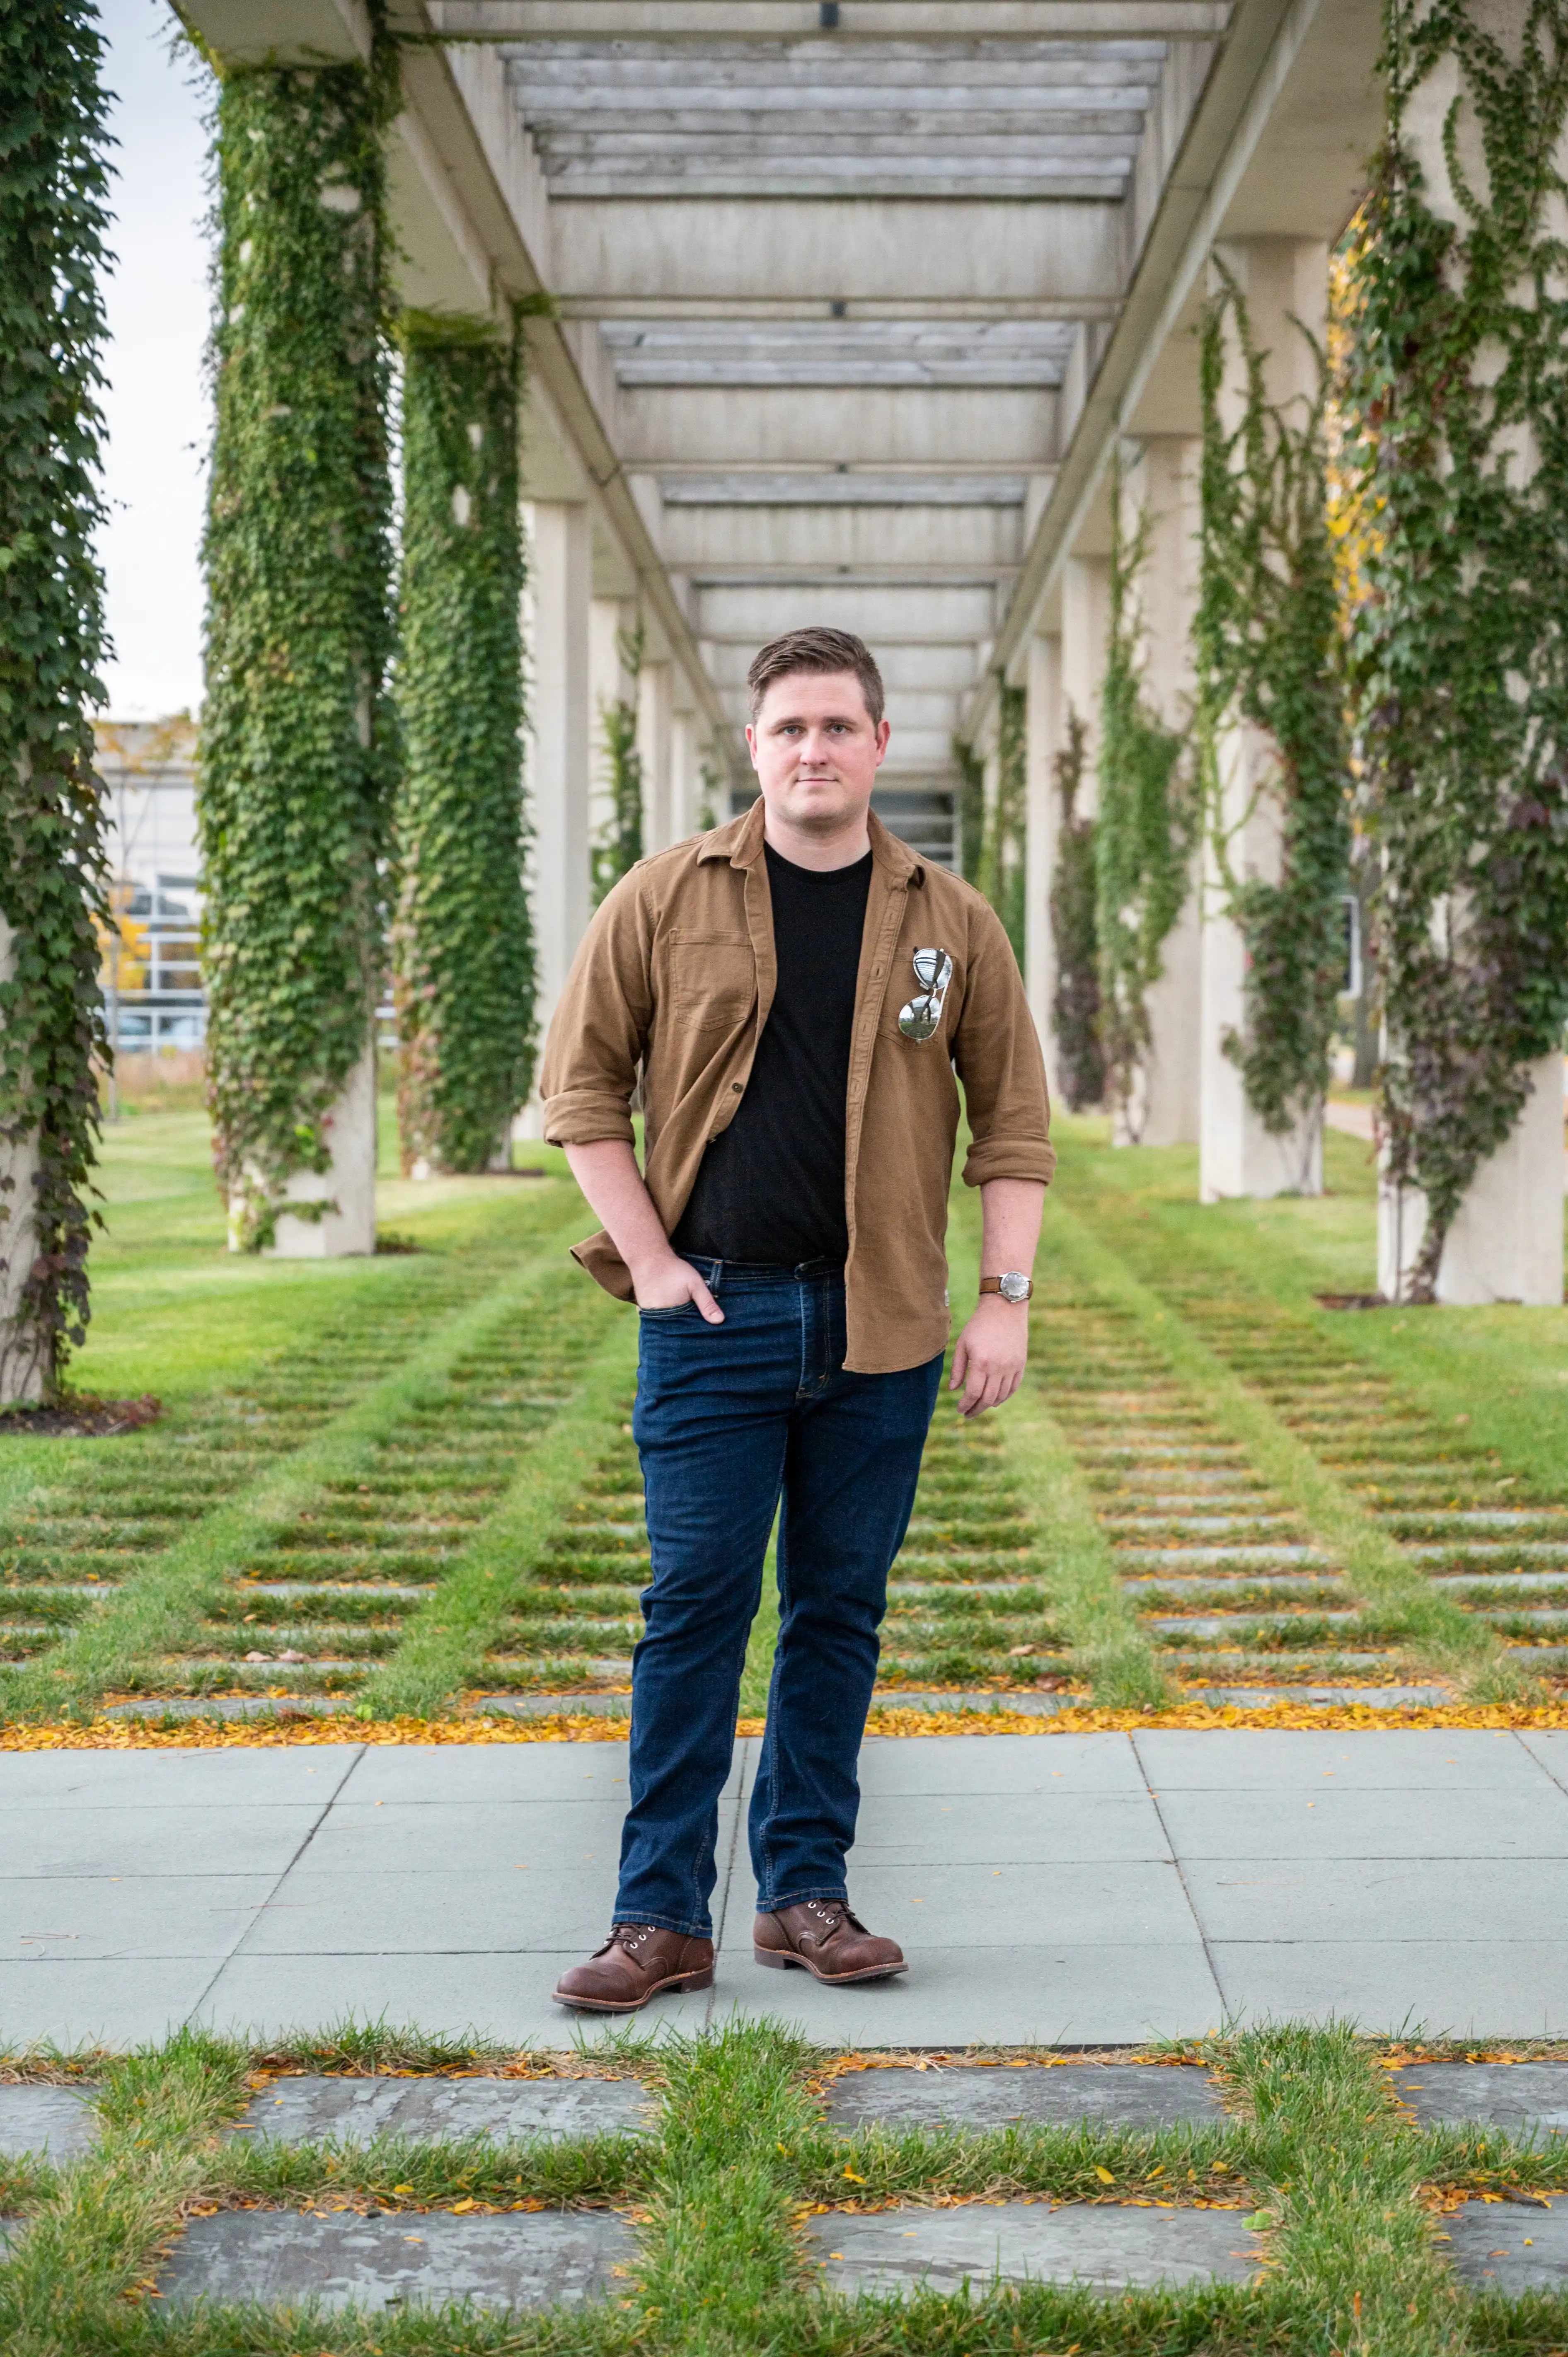 Man standing on a pathway with greenery and vines on columns in the background.